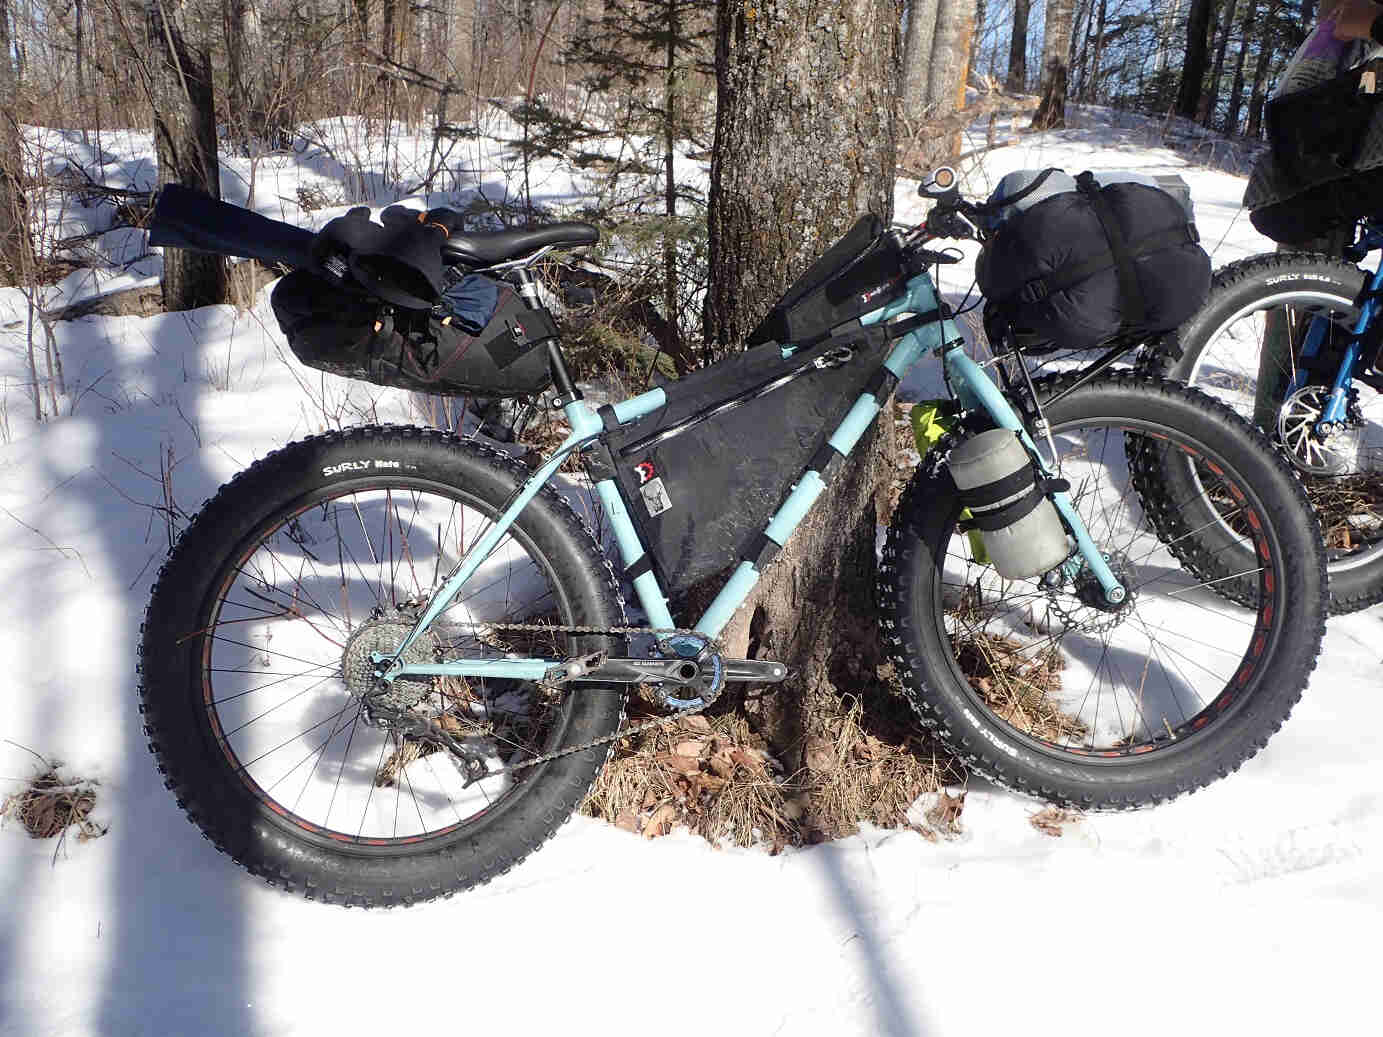 Right side view of a mint Surly Wednesday fat bike, loaded with gear, parked on snow in front of a tree in the woods